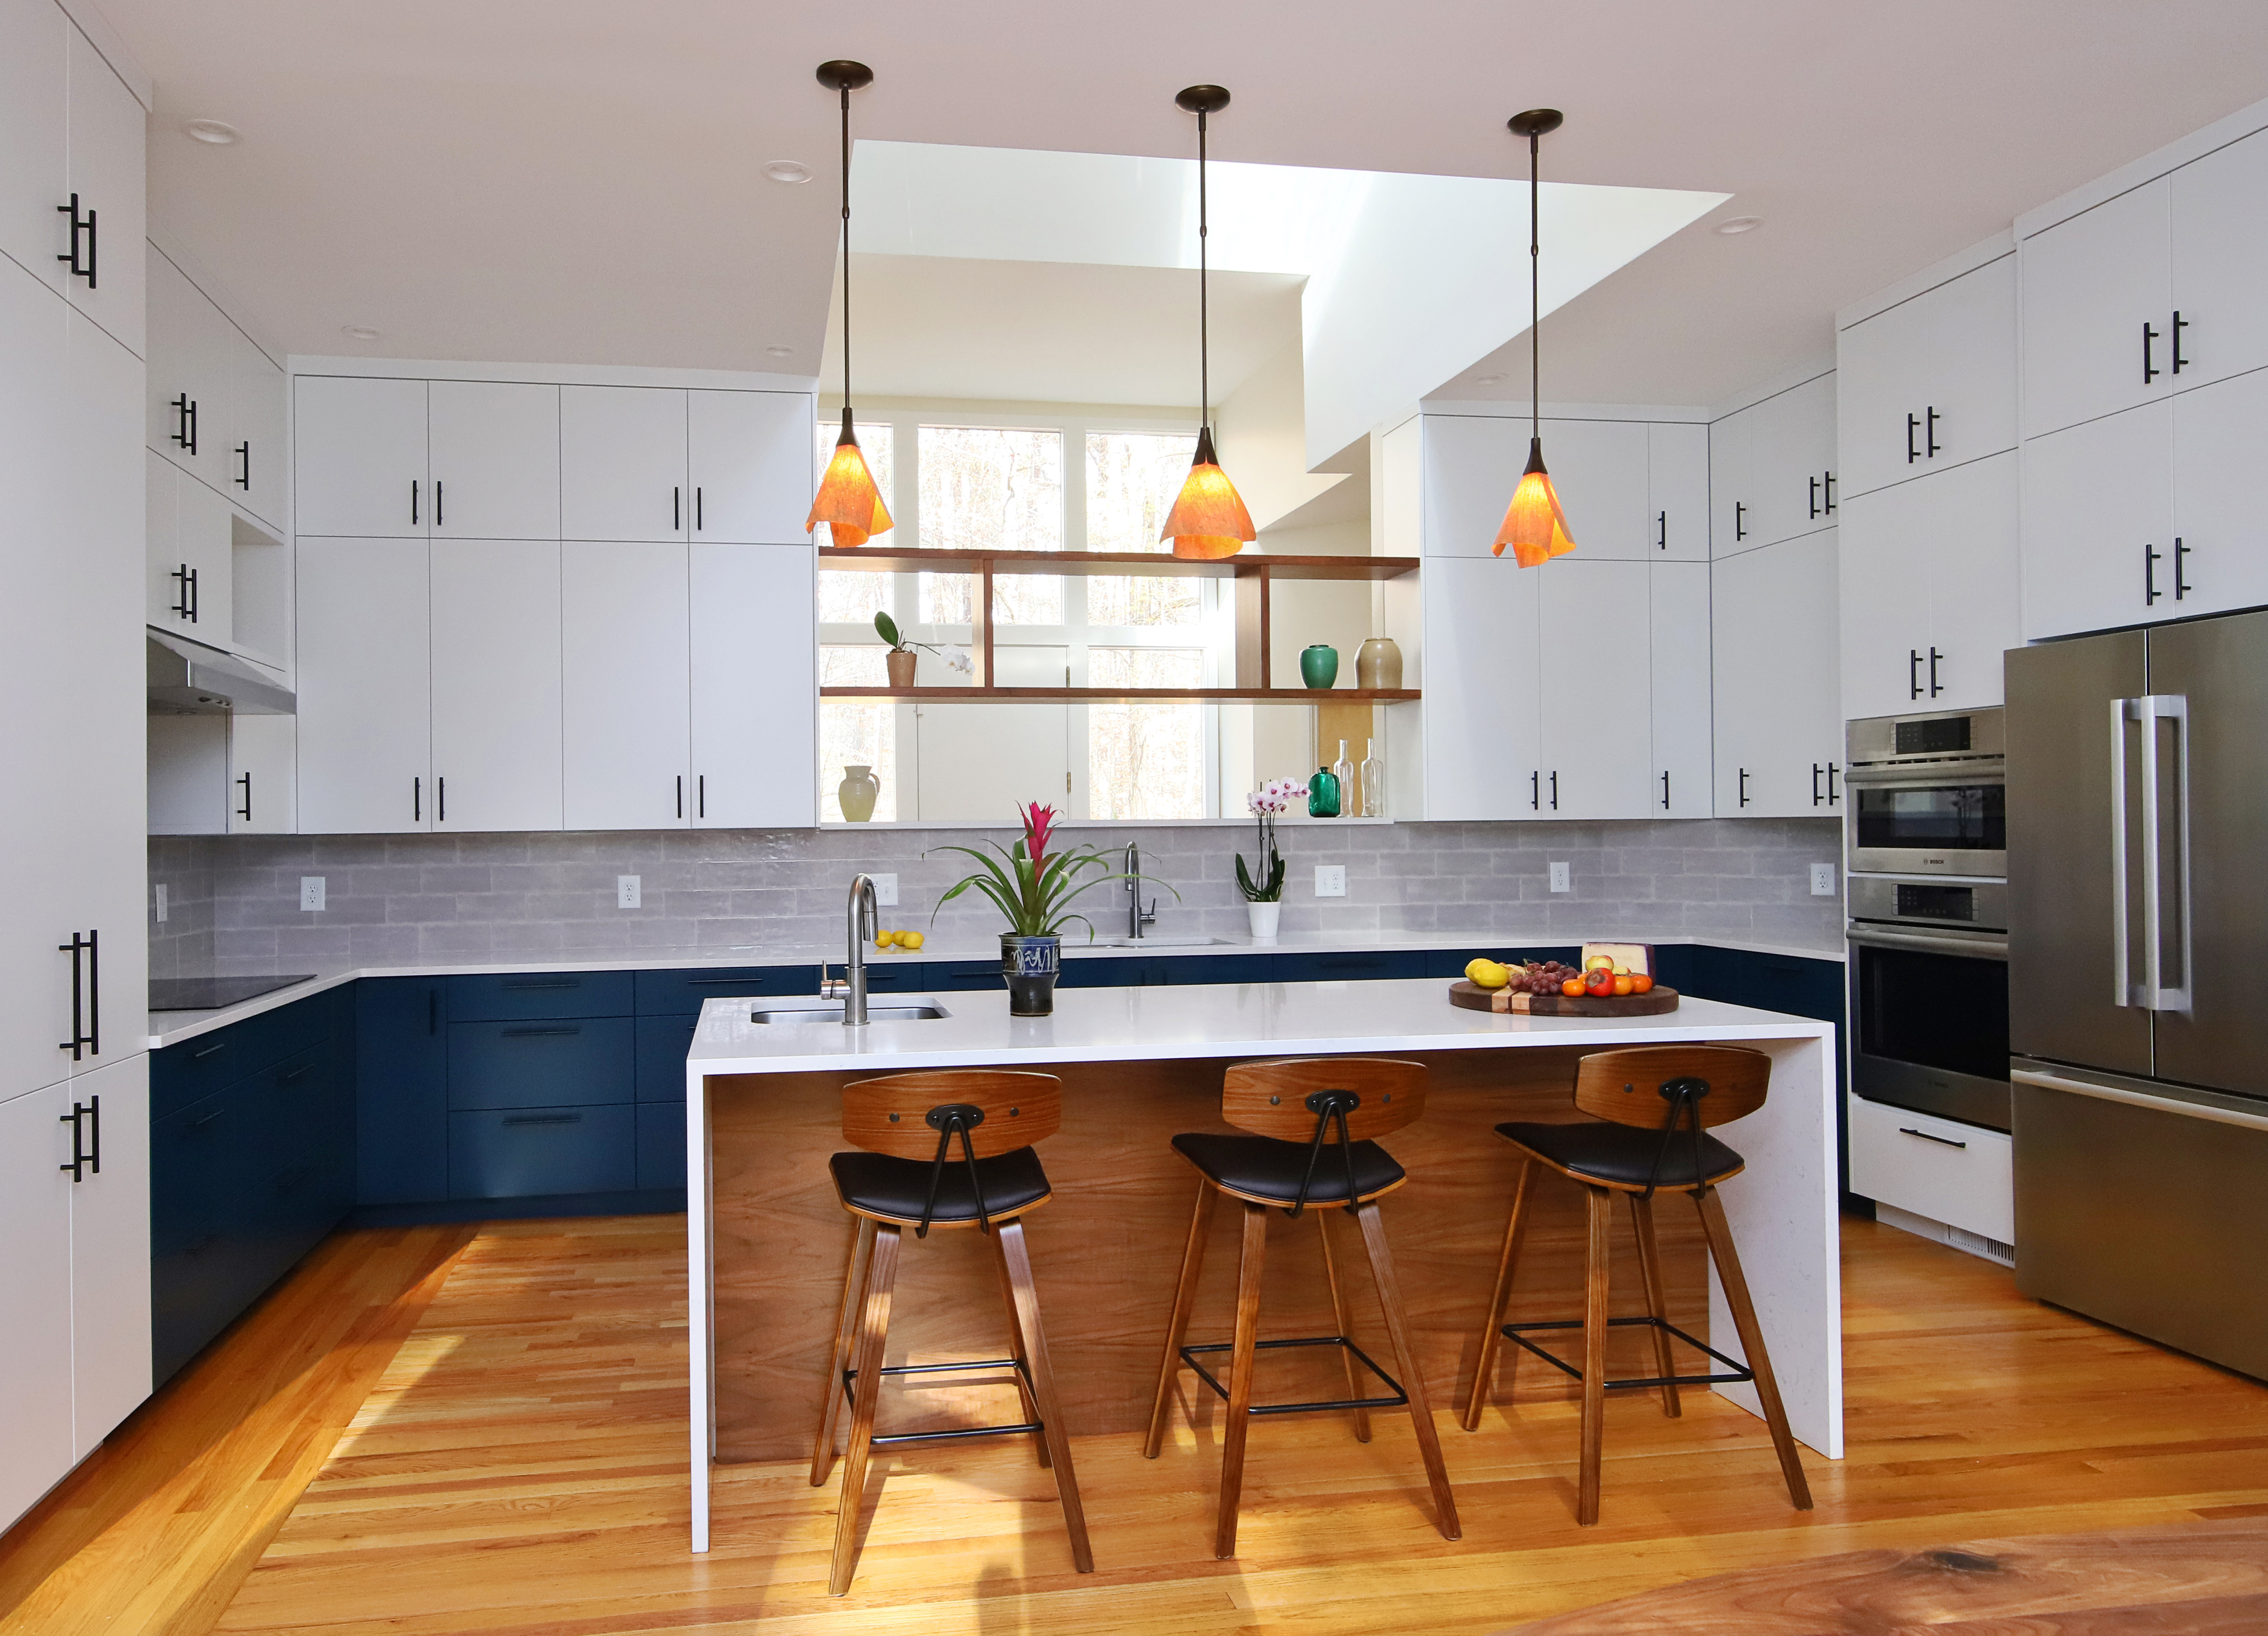 A large light well brings daylight into this contemporary kitchen